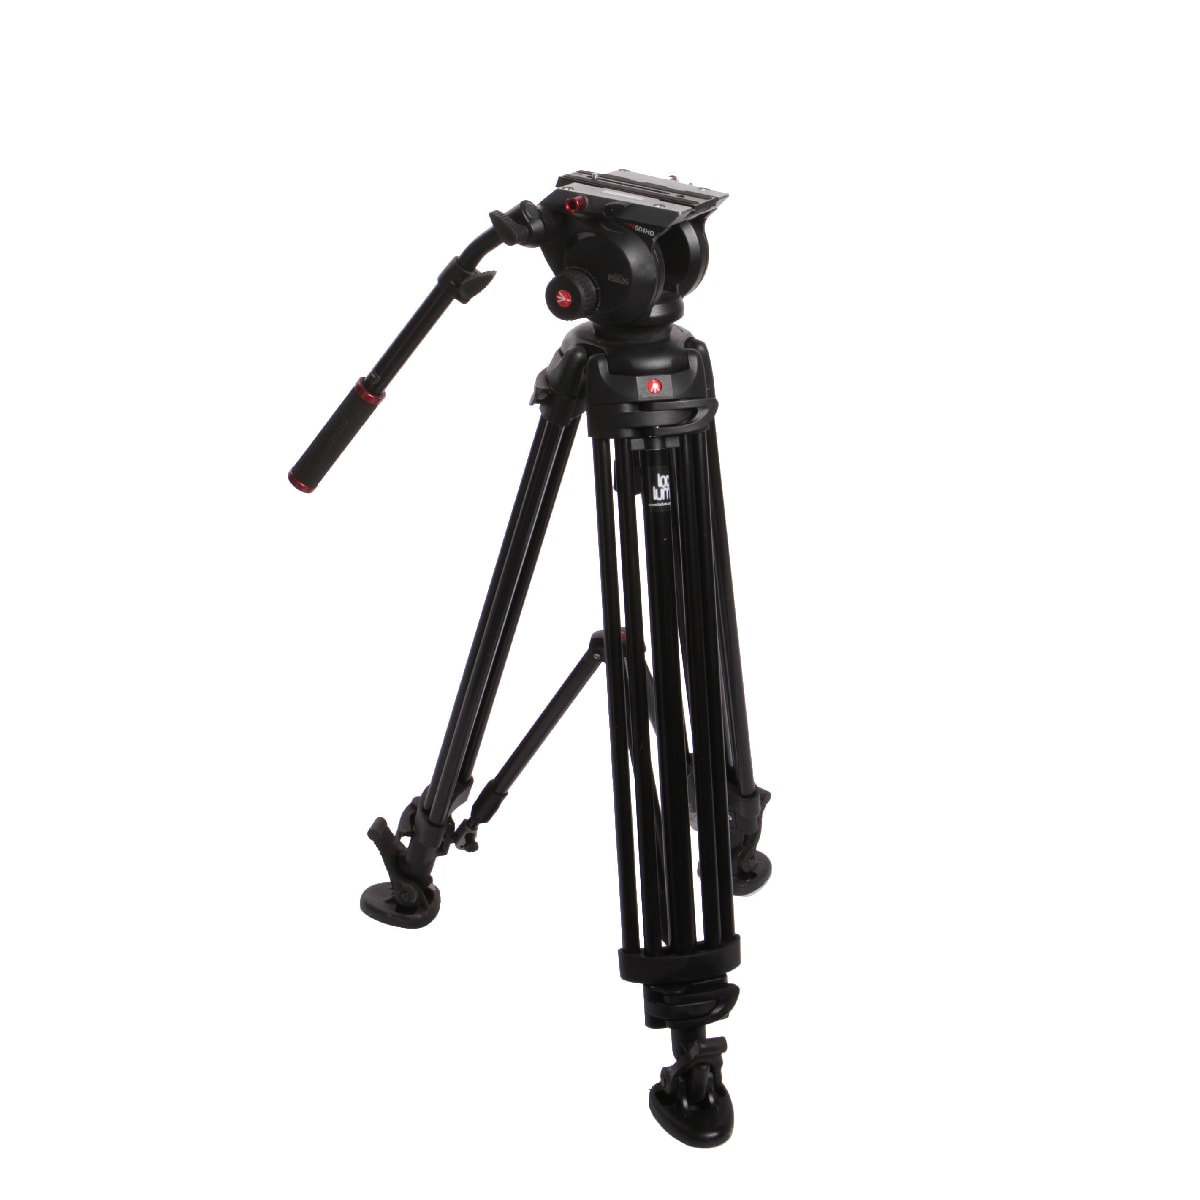 Manfrotto Video Tripod (546B) with Video Head (504HD)